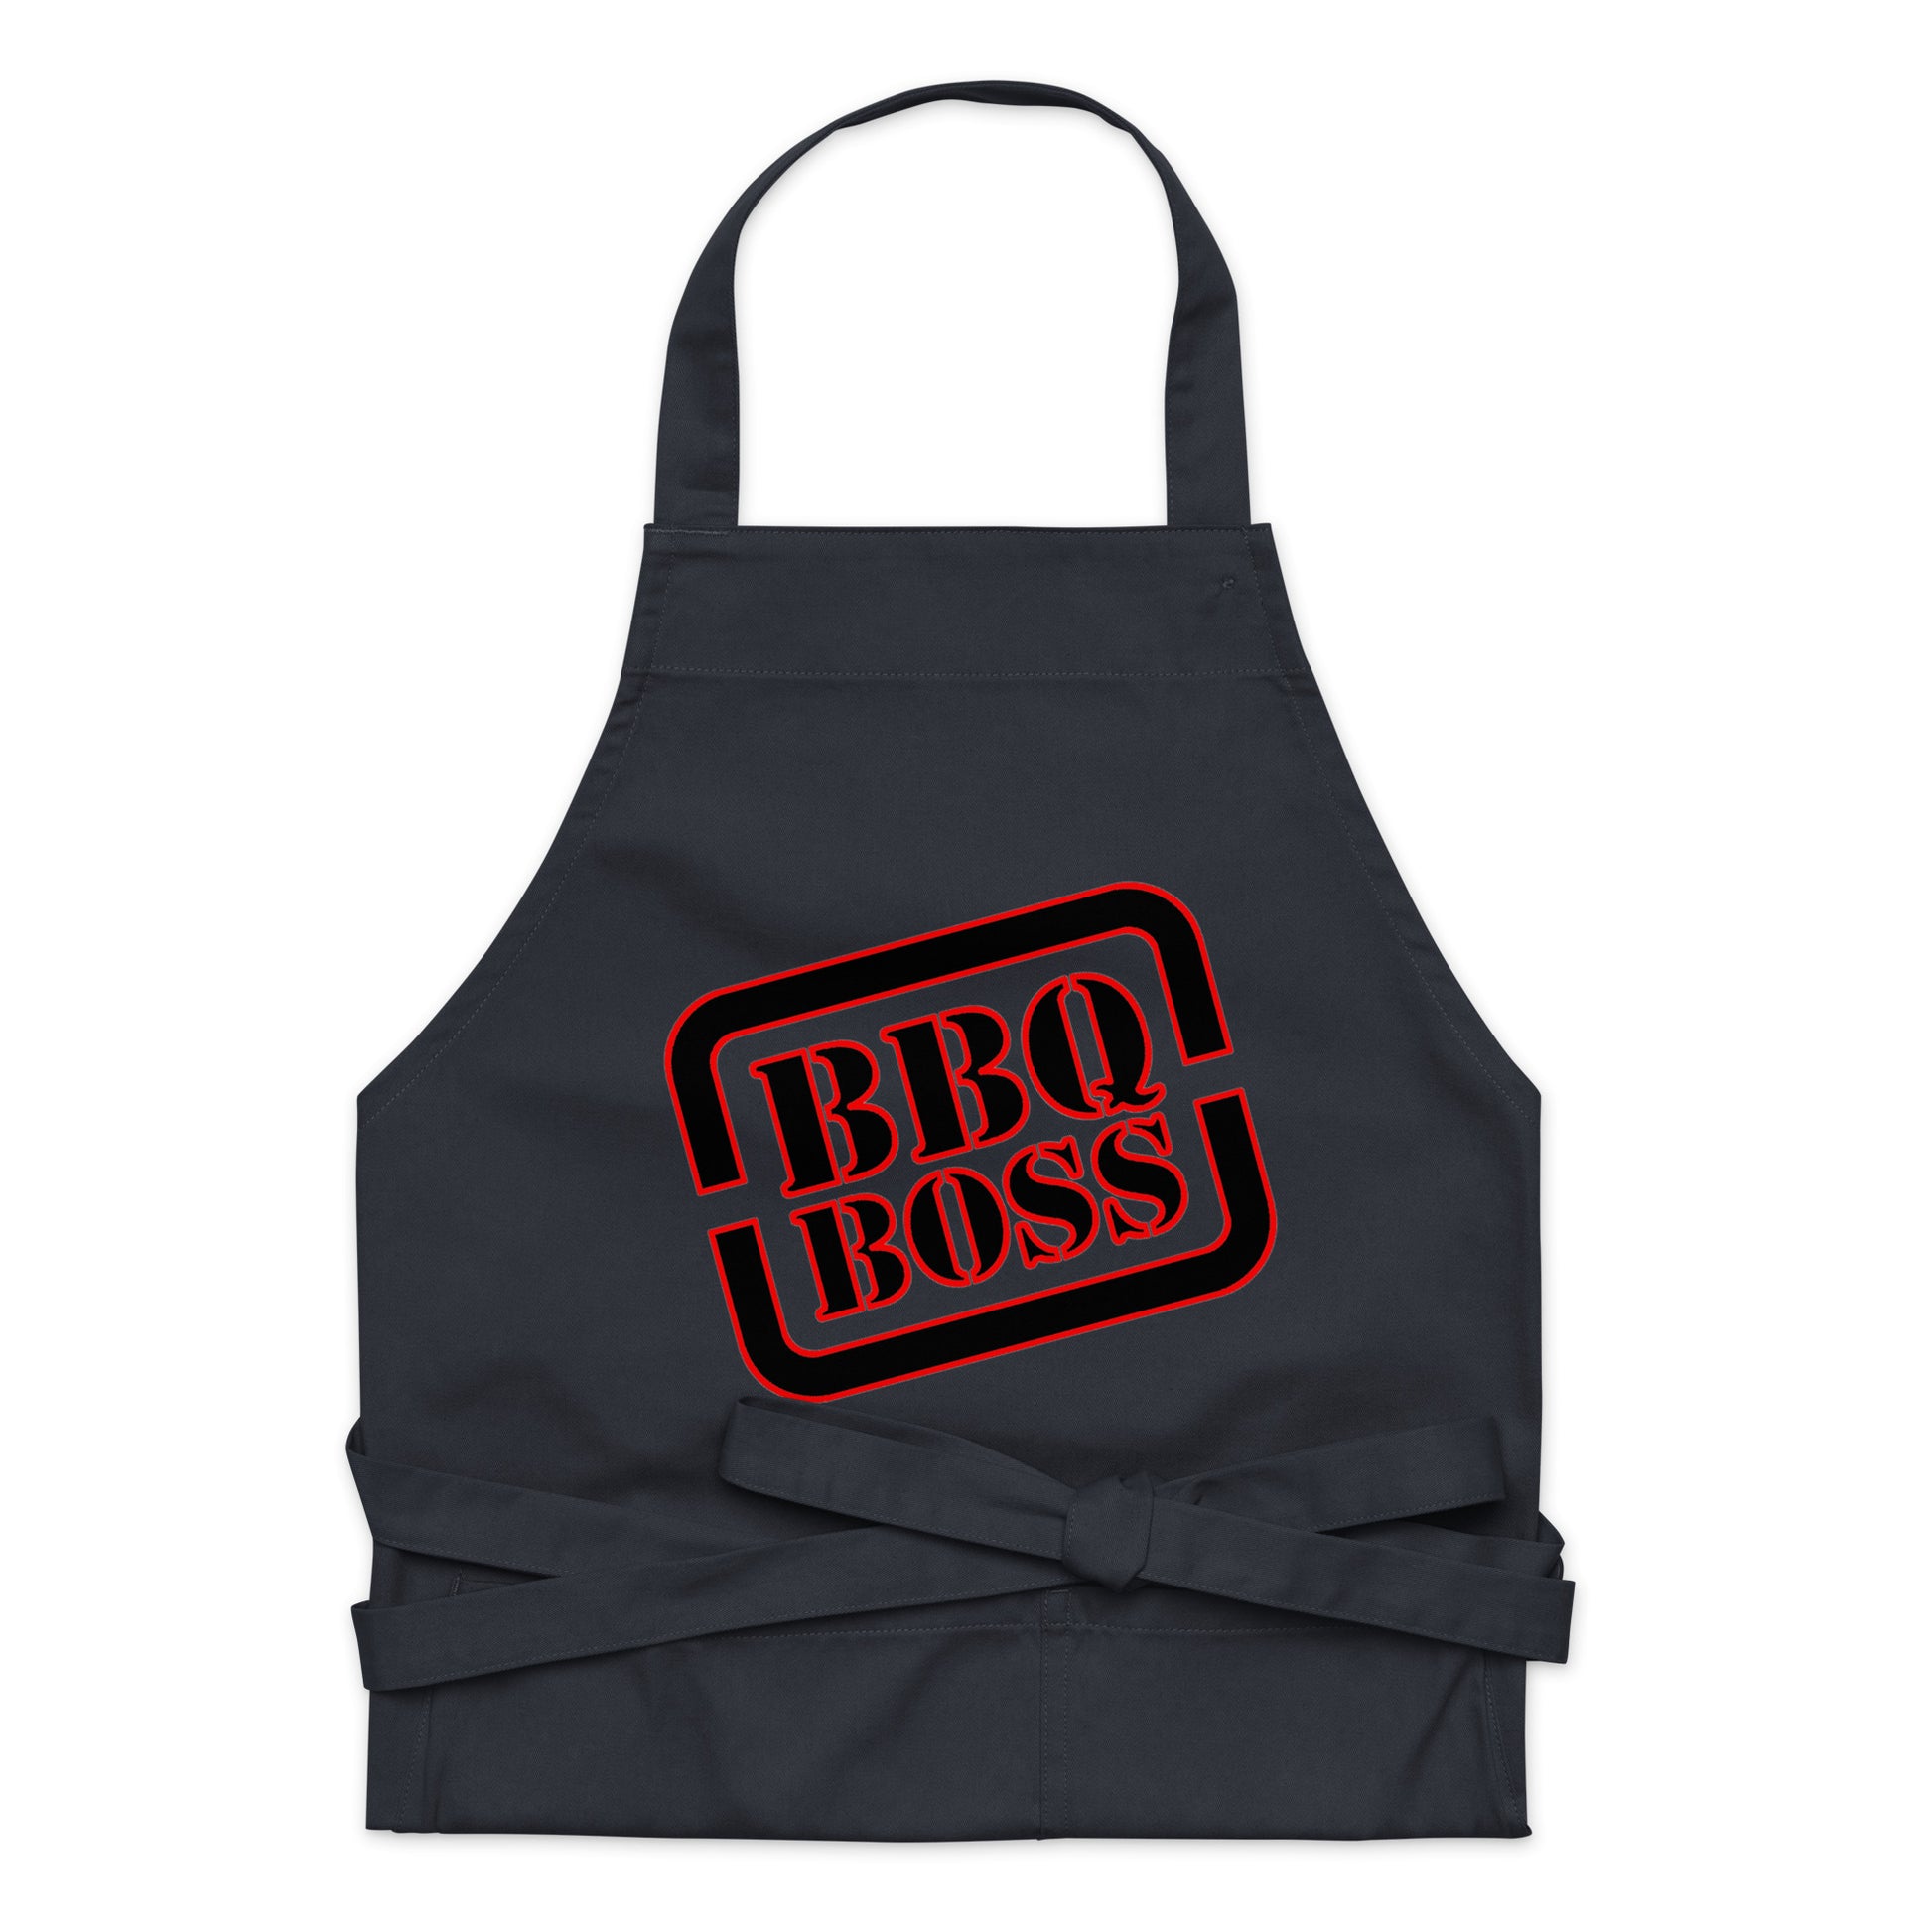 navy blue apron with text "BBQ BOSS"